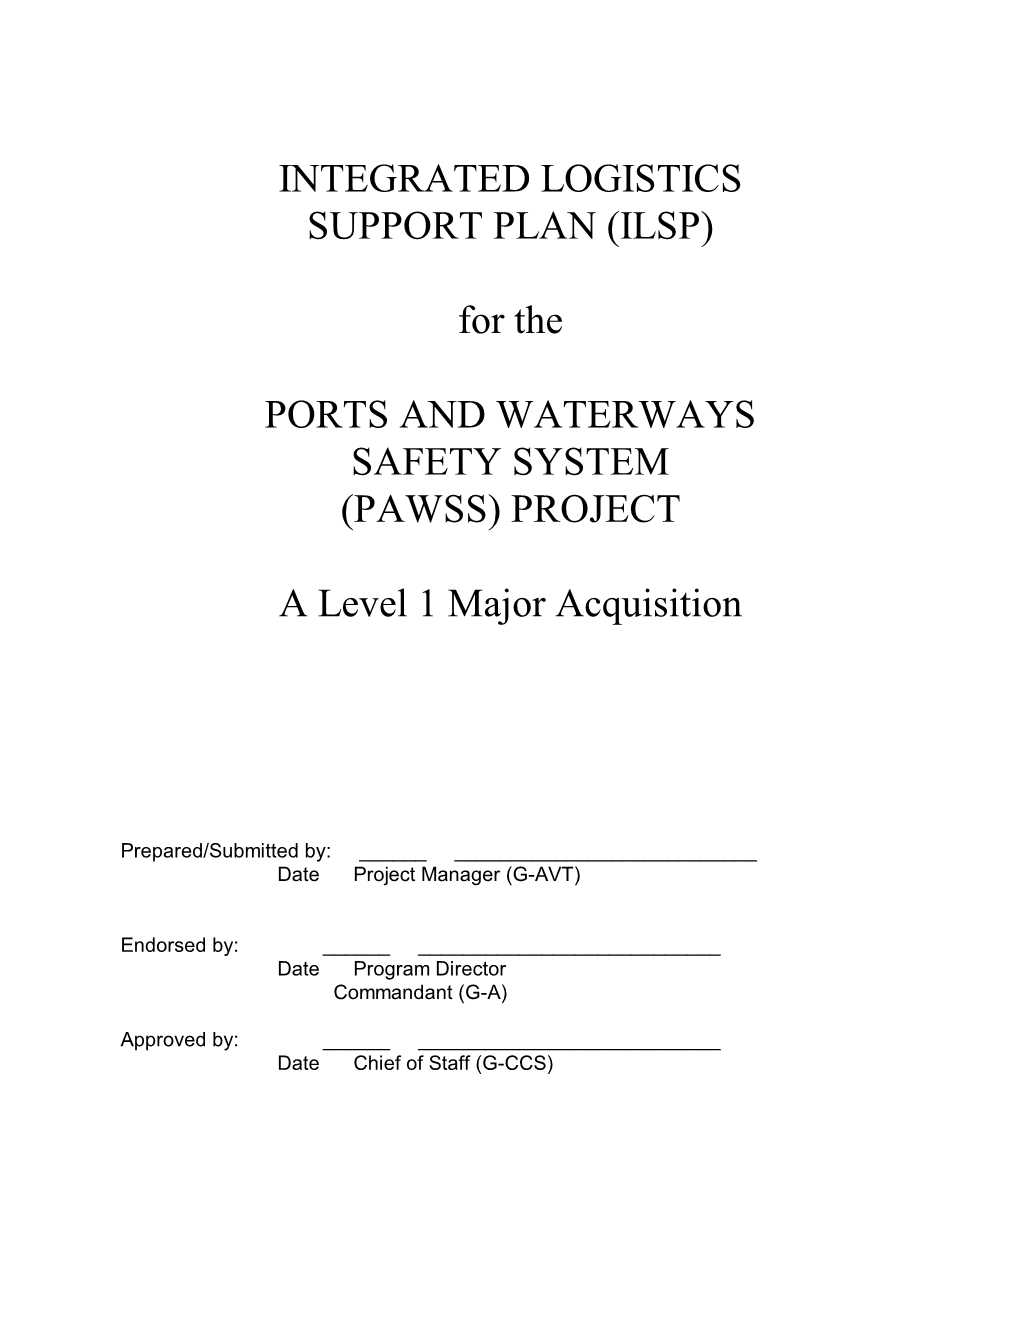 INTEGRATED LOGISTICS SUPPORT PLAN (ILSP) for the PORTS and WATERWAYS SAFETY SYSTEM (PAWSS) PROJECT a Level 1 Major Acquisition